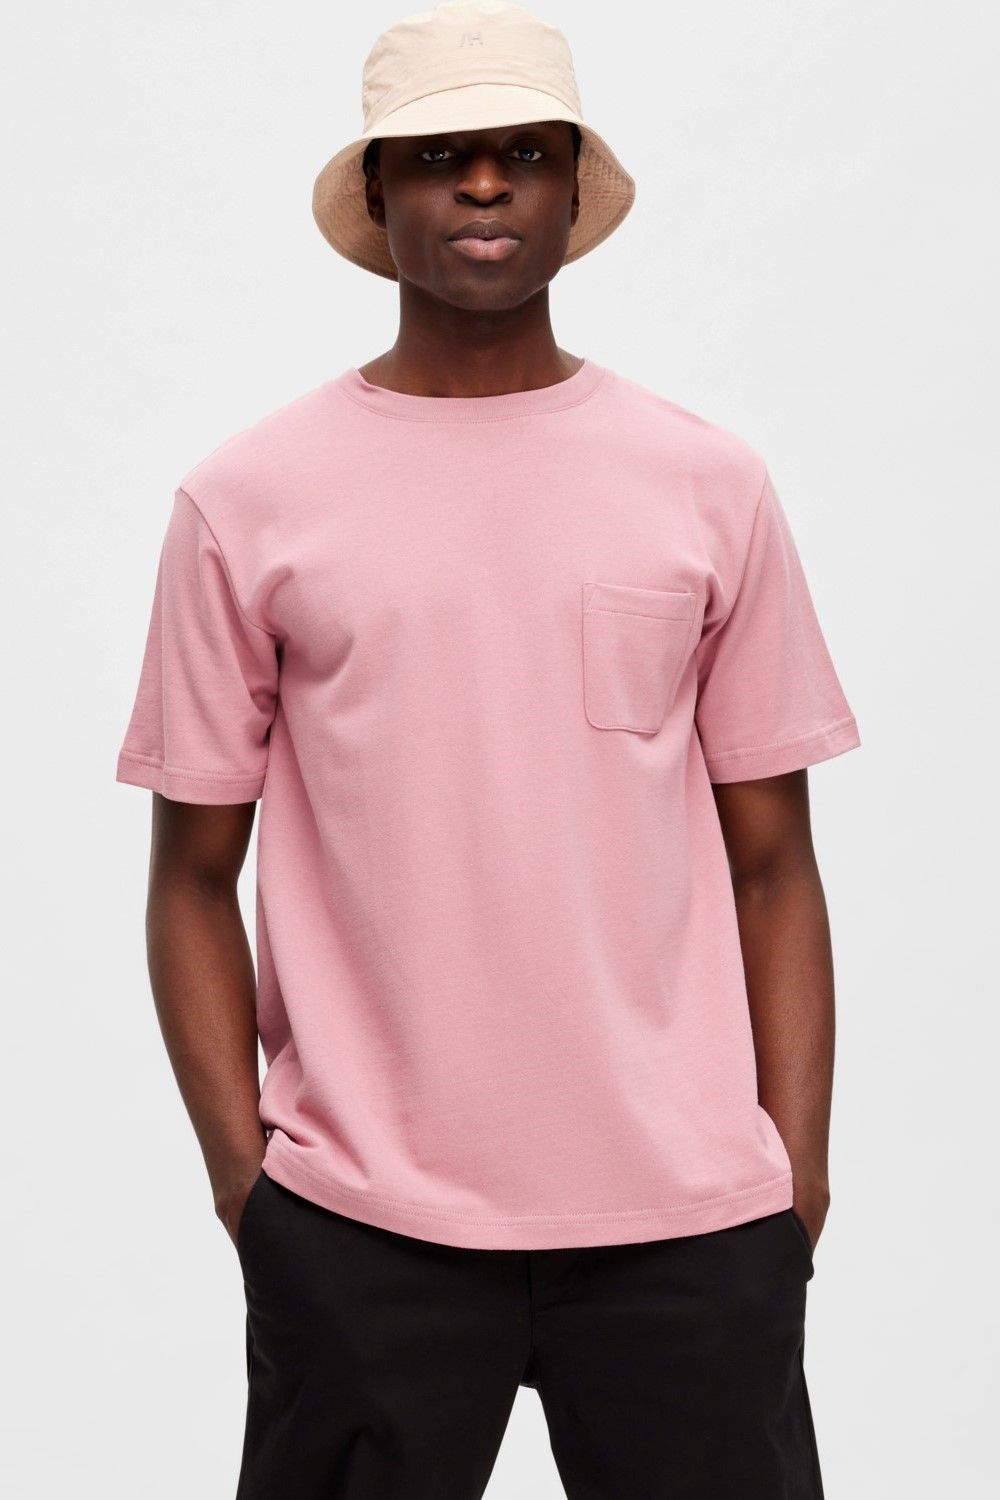 Selected  Homme tee-Shirt Rose hommes (SLCT/Man-TeeShirt uni - RELAX SOON TeeShirt uni rose) - Marine | Much more than shoes